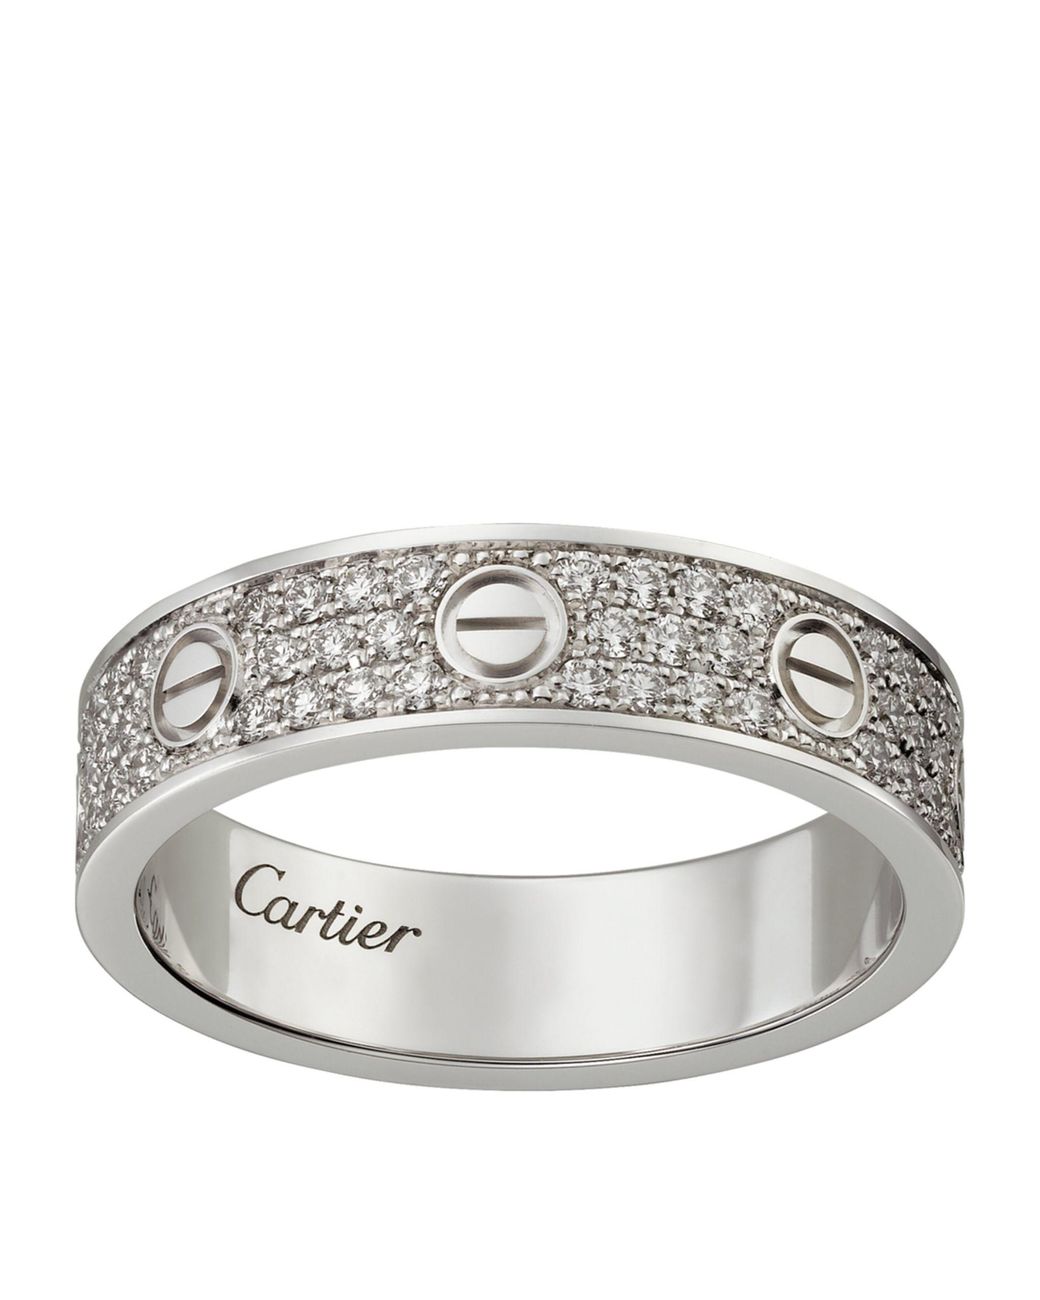 Cartier Love Ring in White Gold Size 51 at Susannah Lovis Jewellers